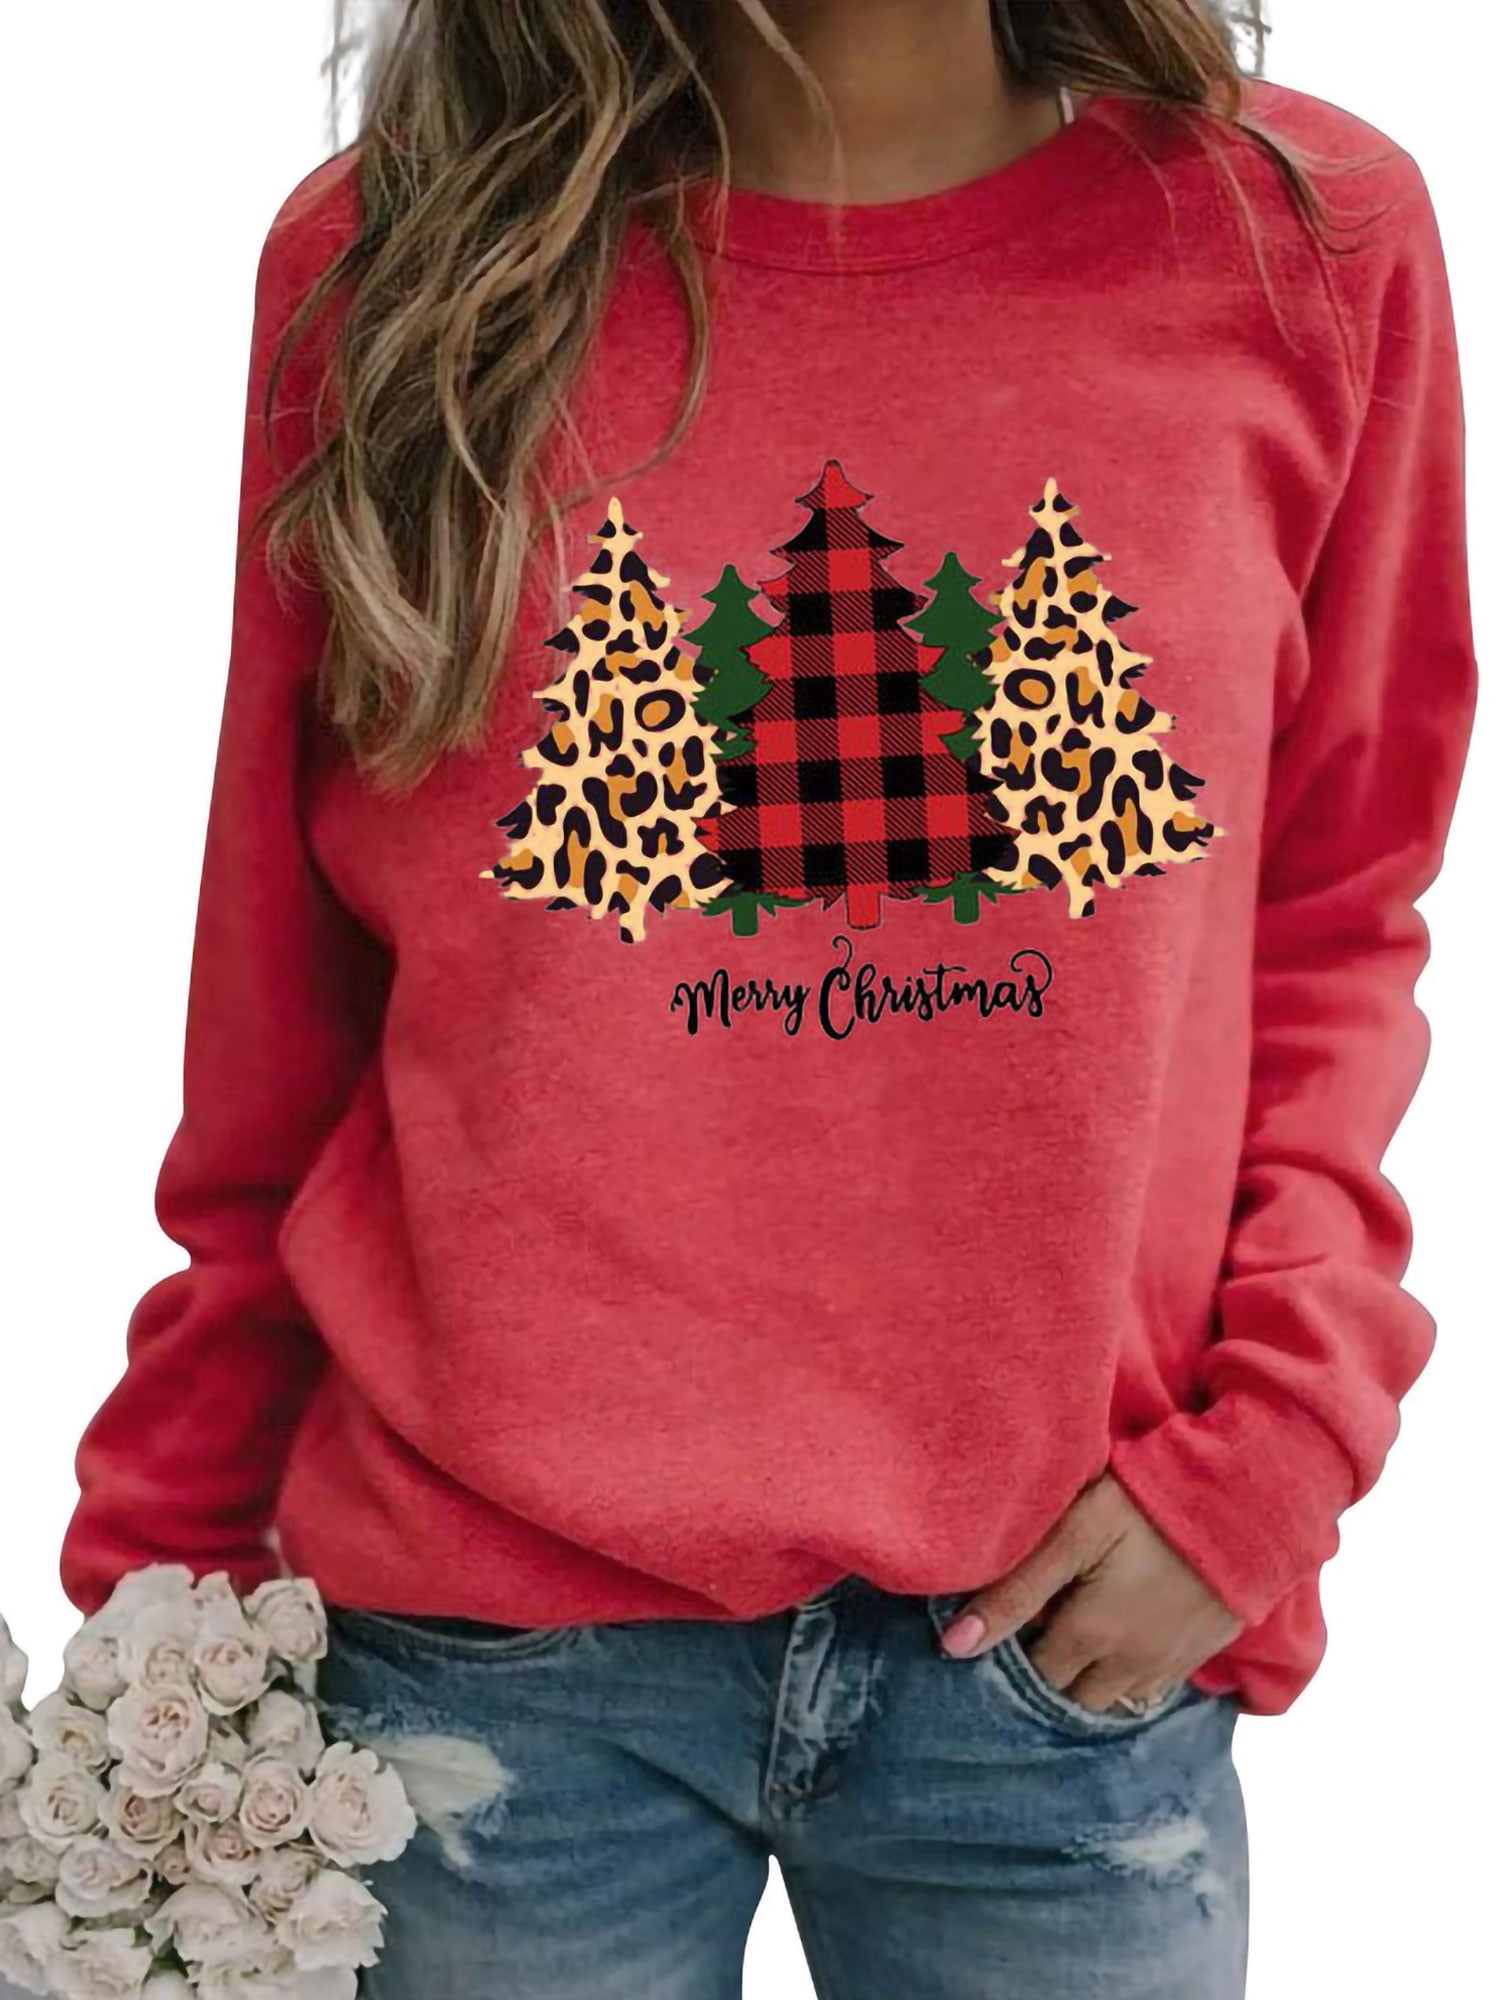 Christmas holiday comfy clothes leopard print Most wonderful time of year uncommon crew sweatshirt plus size Black & white buffalo plaid